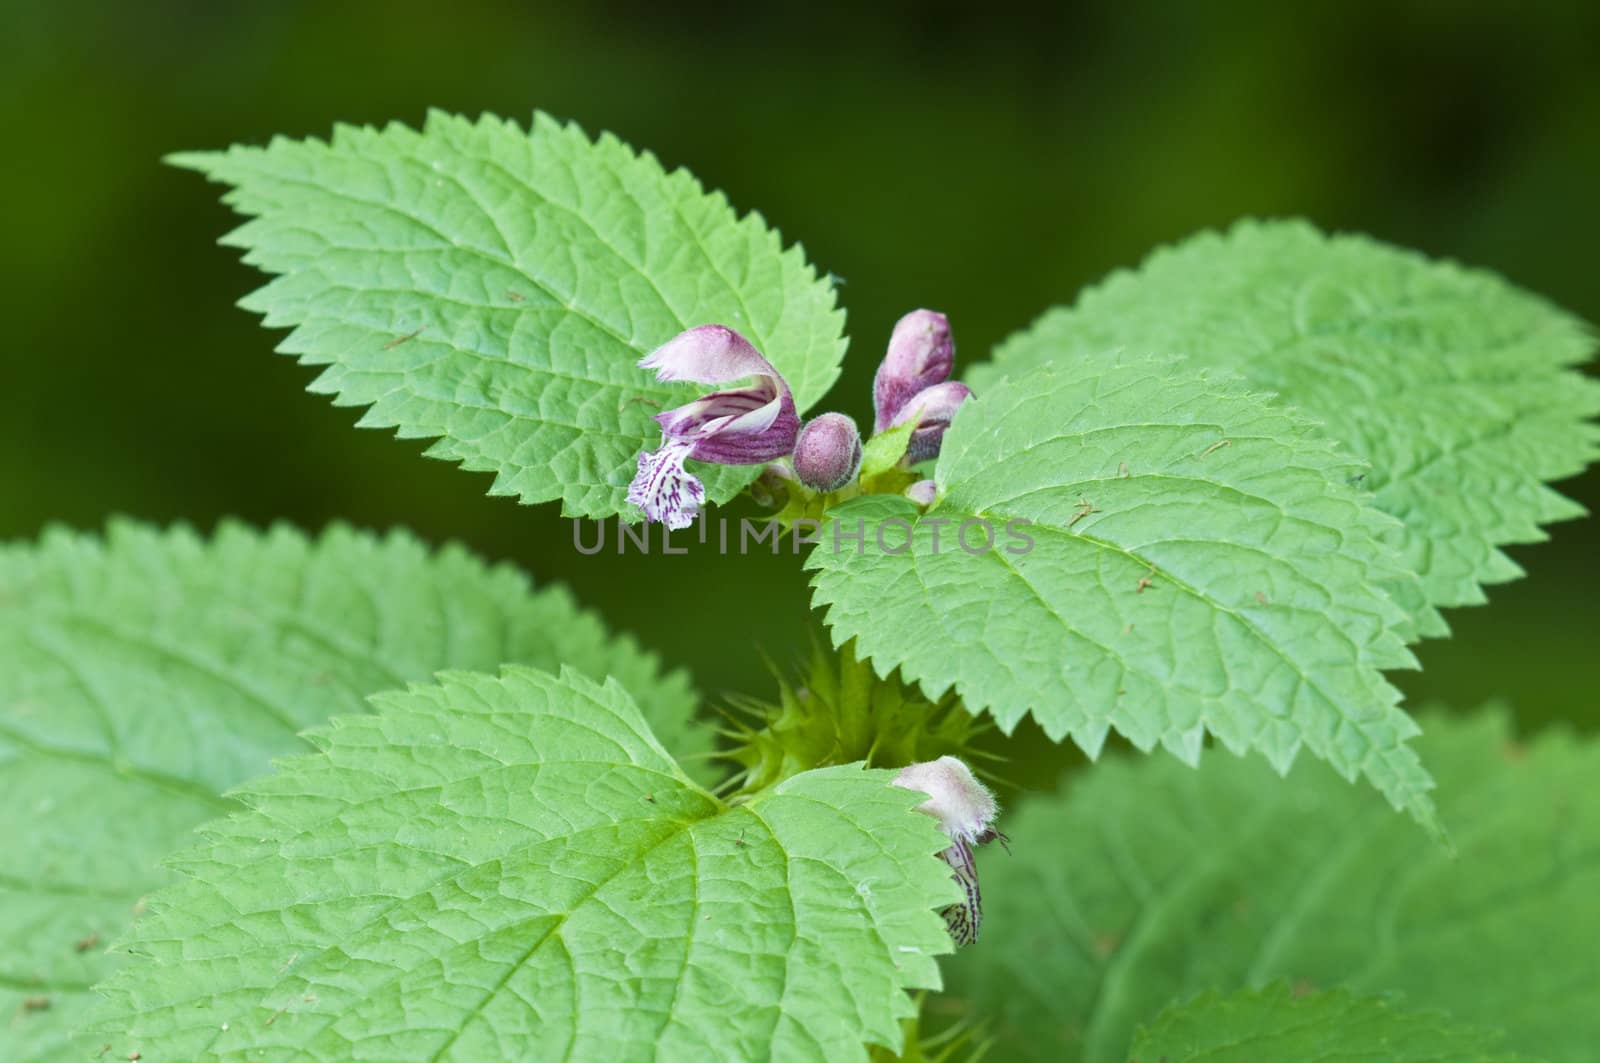 Stinging nettle flowers and leaves